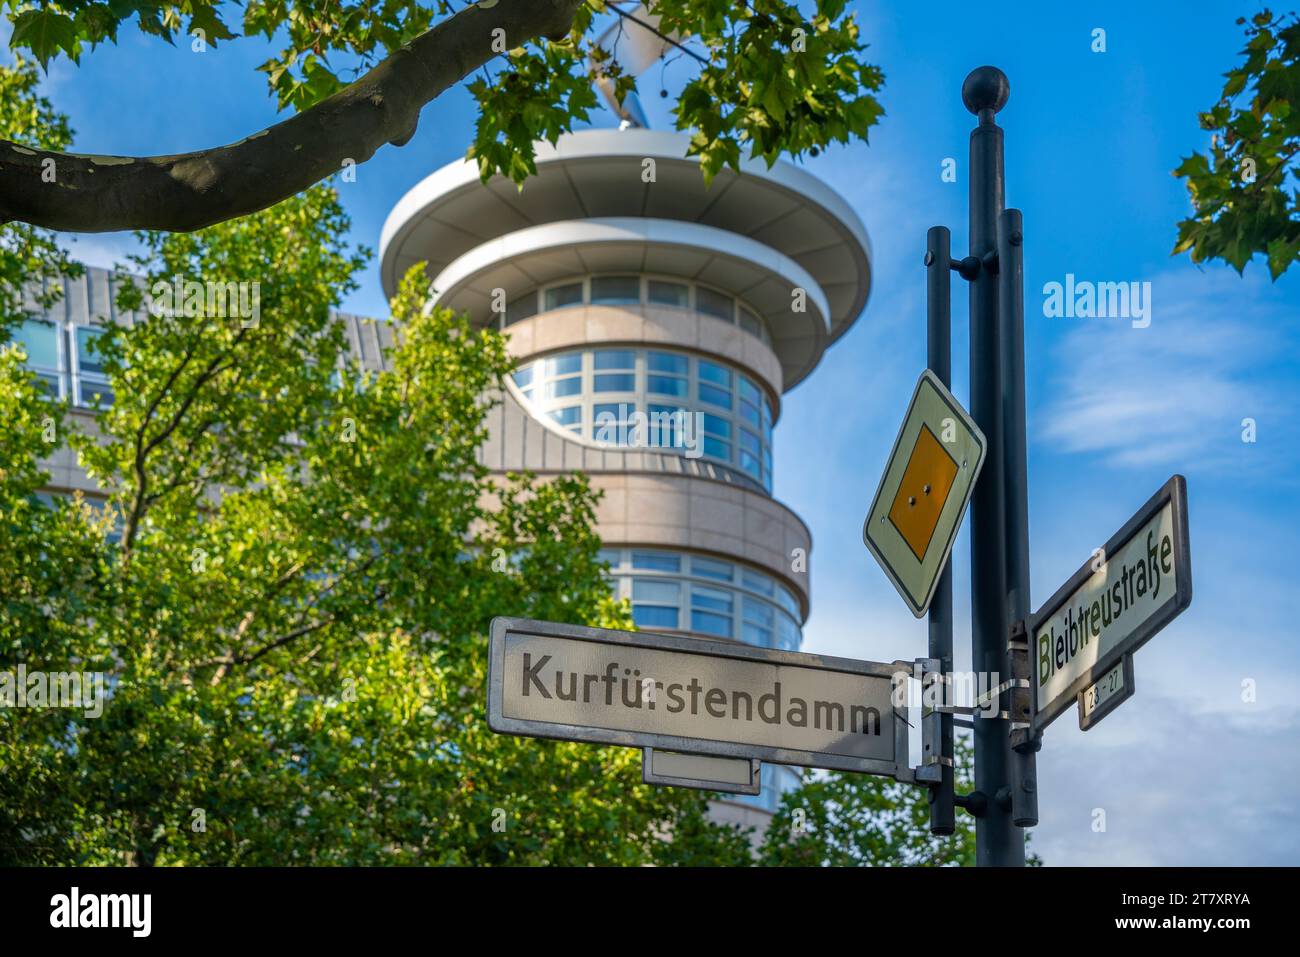 View of sign and building on the tree lined Kurfurstendam in Berlin, Germany, Europe Stock Photo